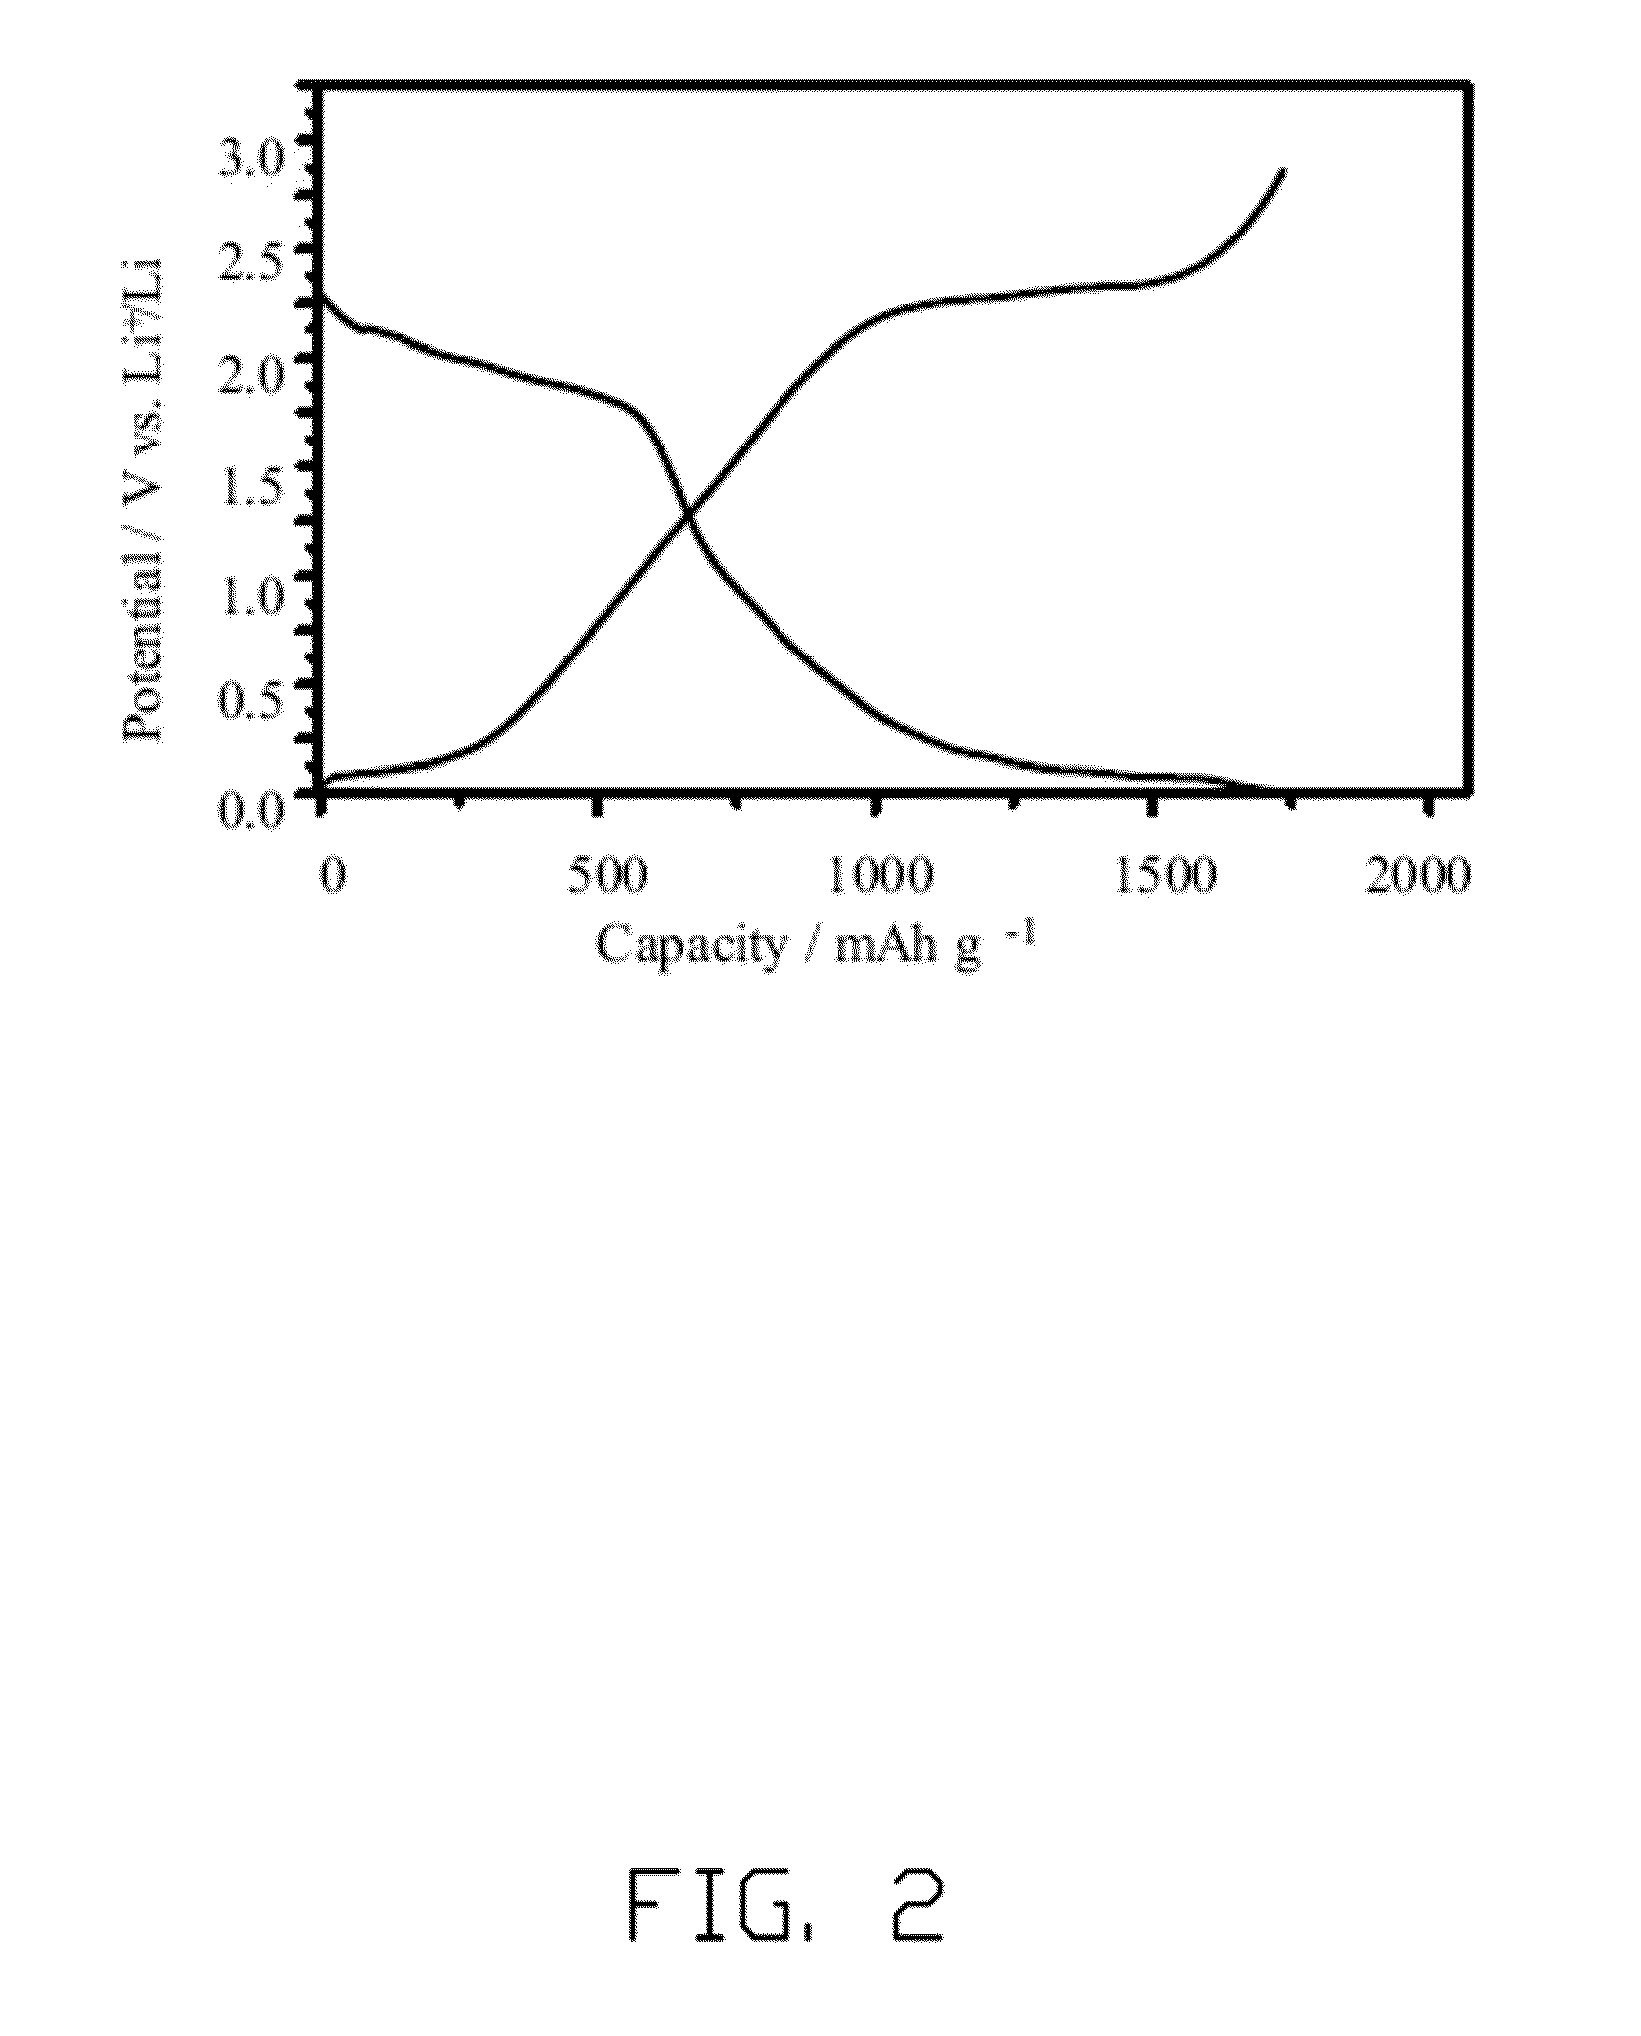 Cycling method for sulfur composite lithium ion battery